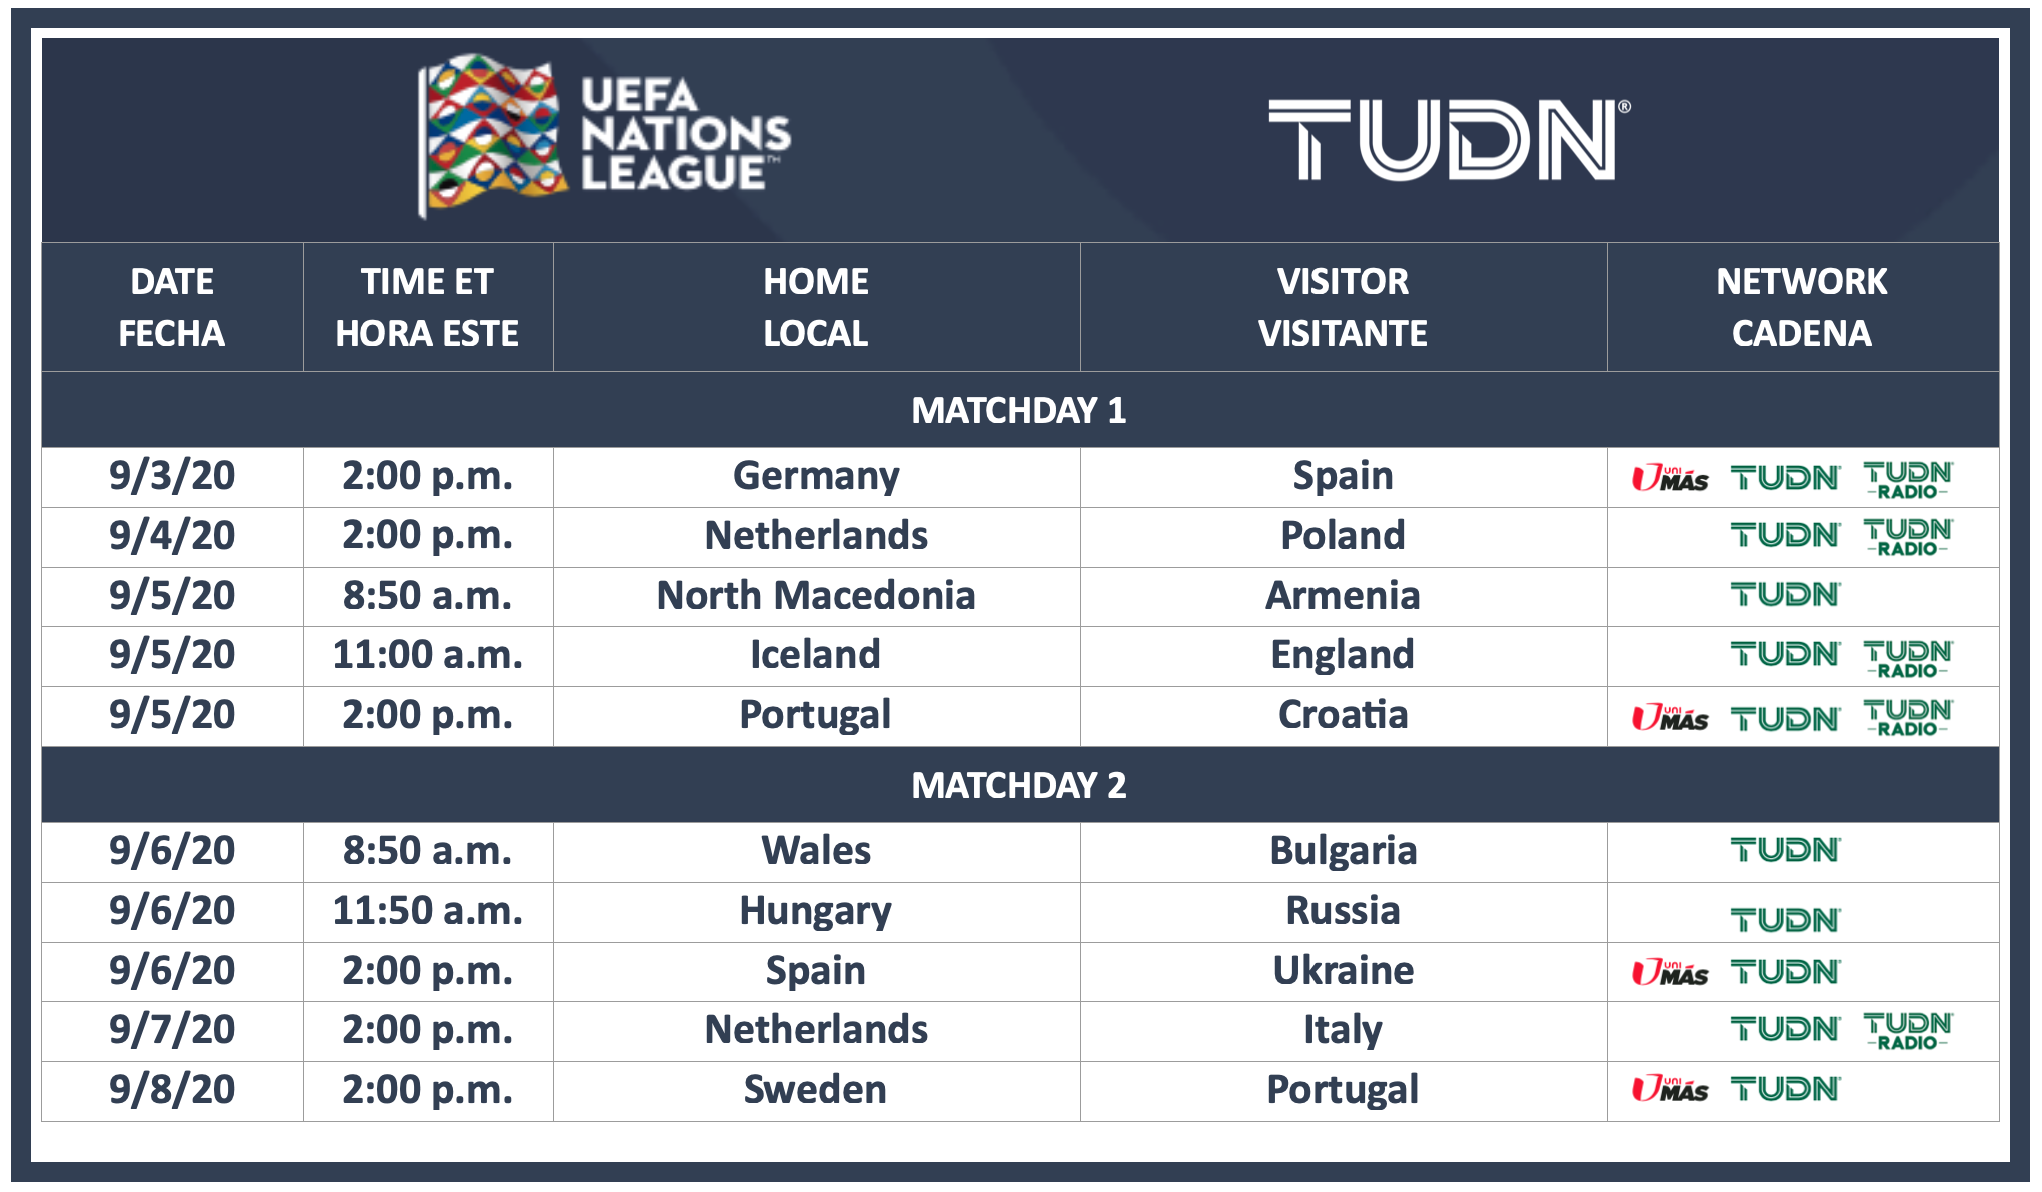 TUDN to Carry All the Action of the 2020/21 UEFA Nations League Across its Linear and Digital Platforms